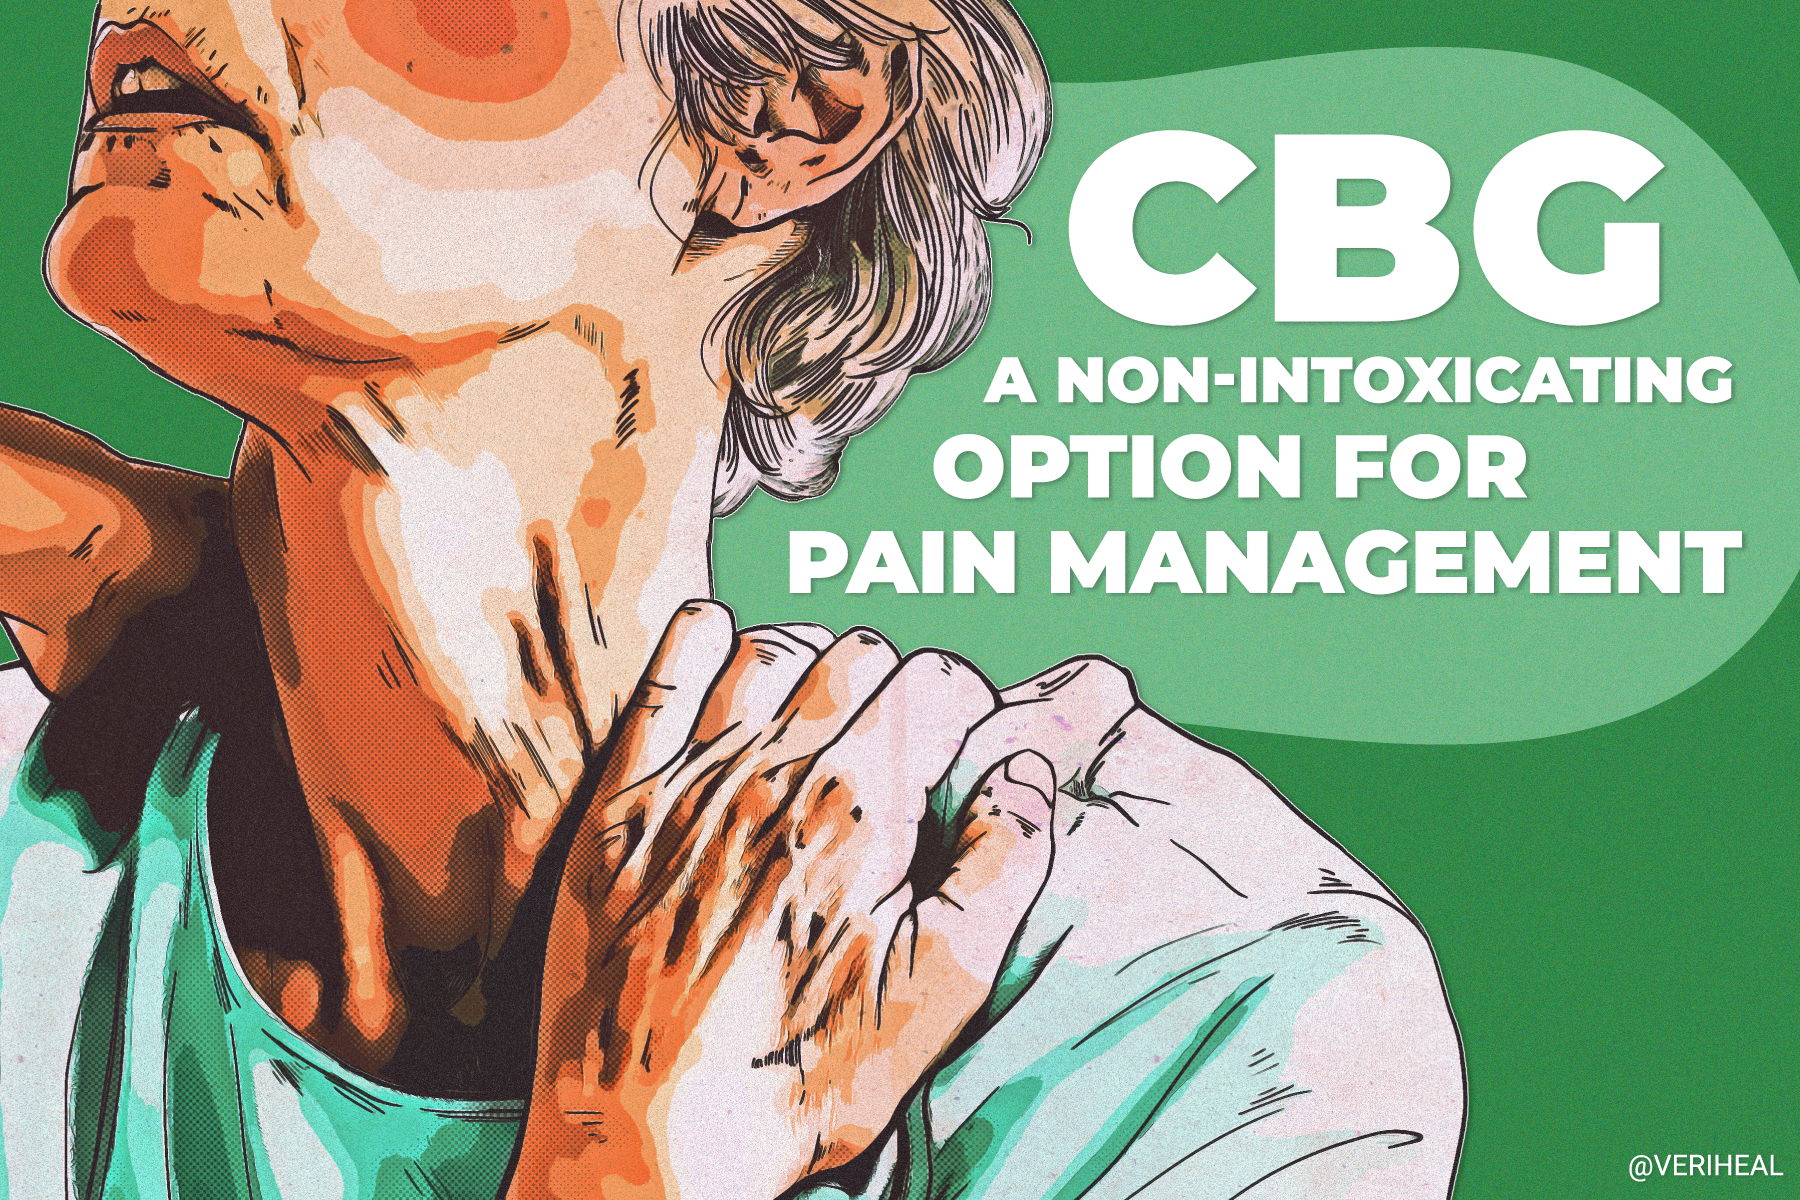 CBG: A Non-Intoxicating Option for Pain Management